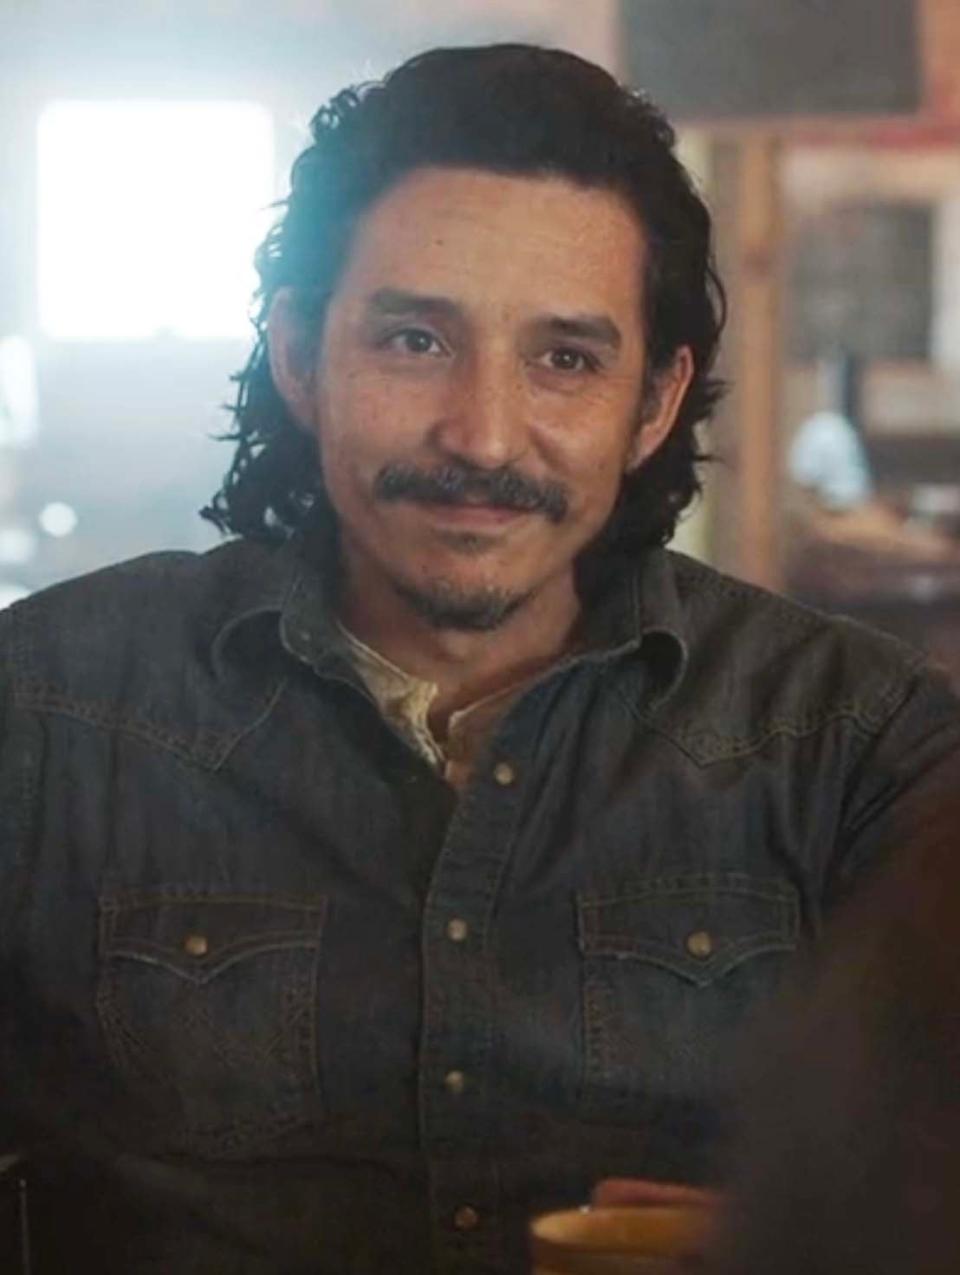 Tommy in The Last of Us Season 1 in a denim shirt sitting, slightly smiling. Appears in a casual indoor setting